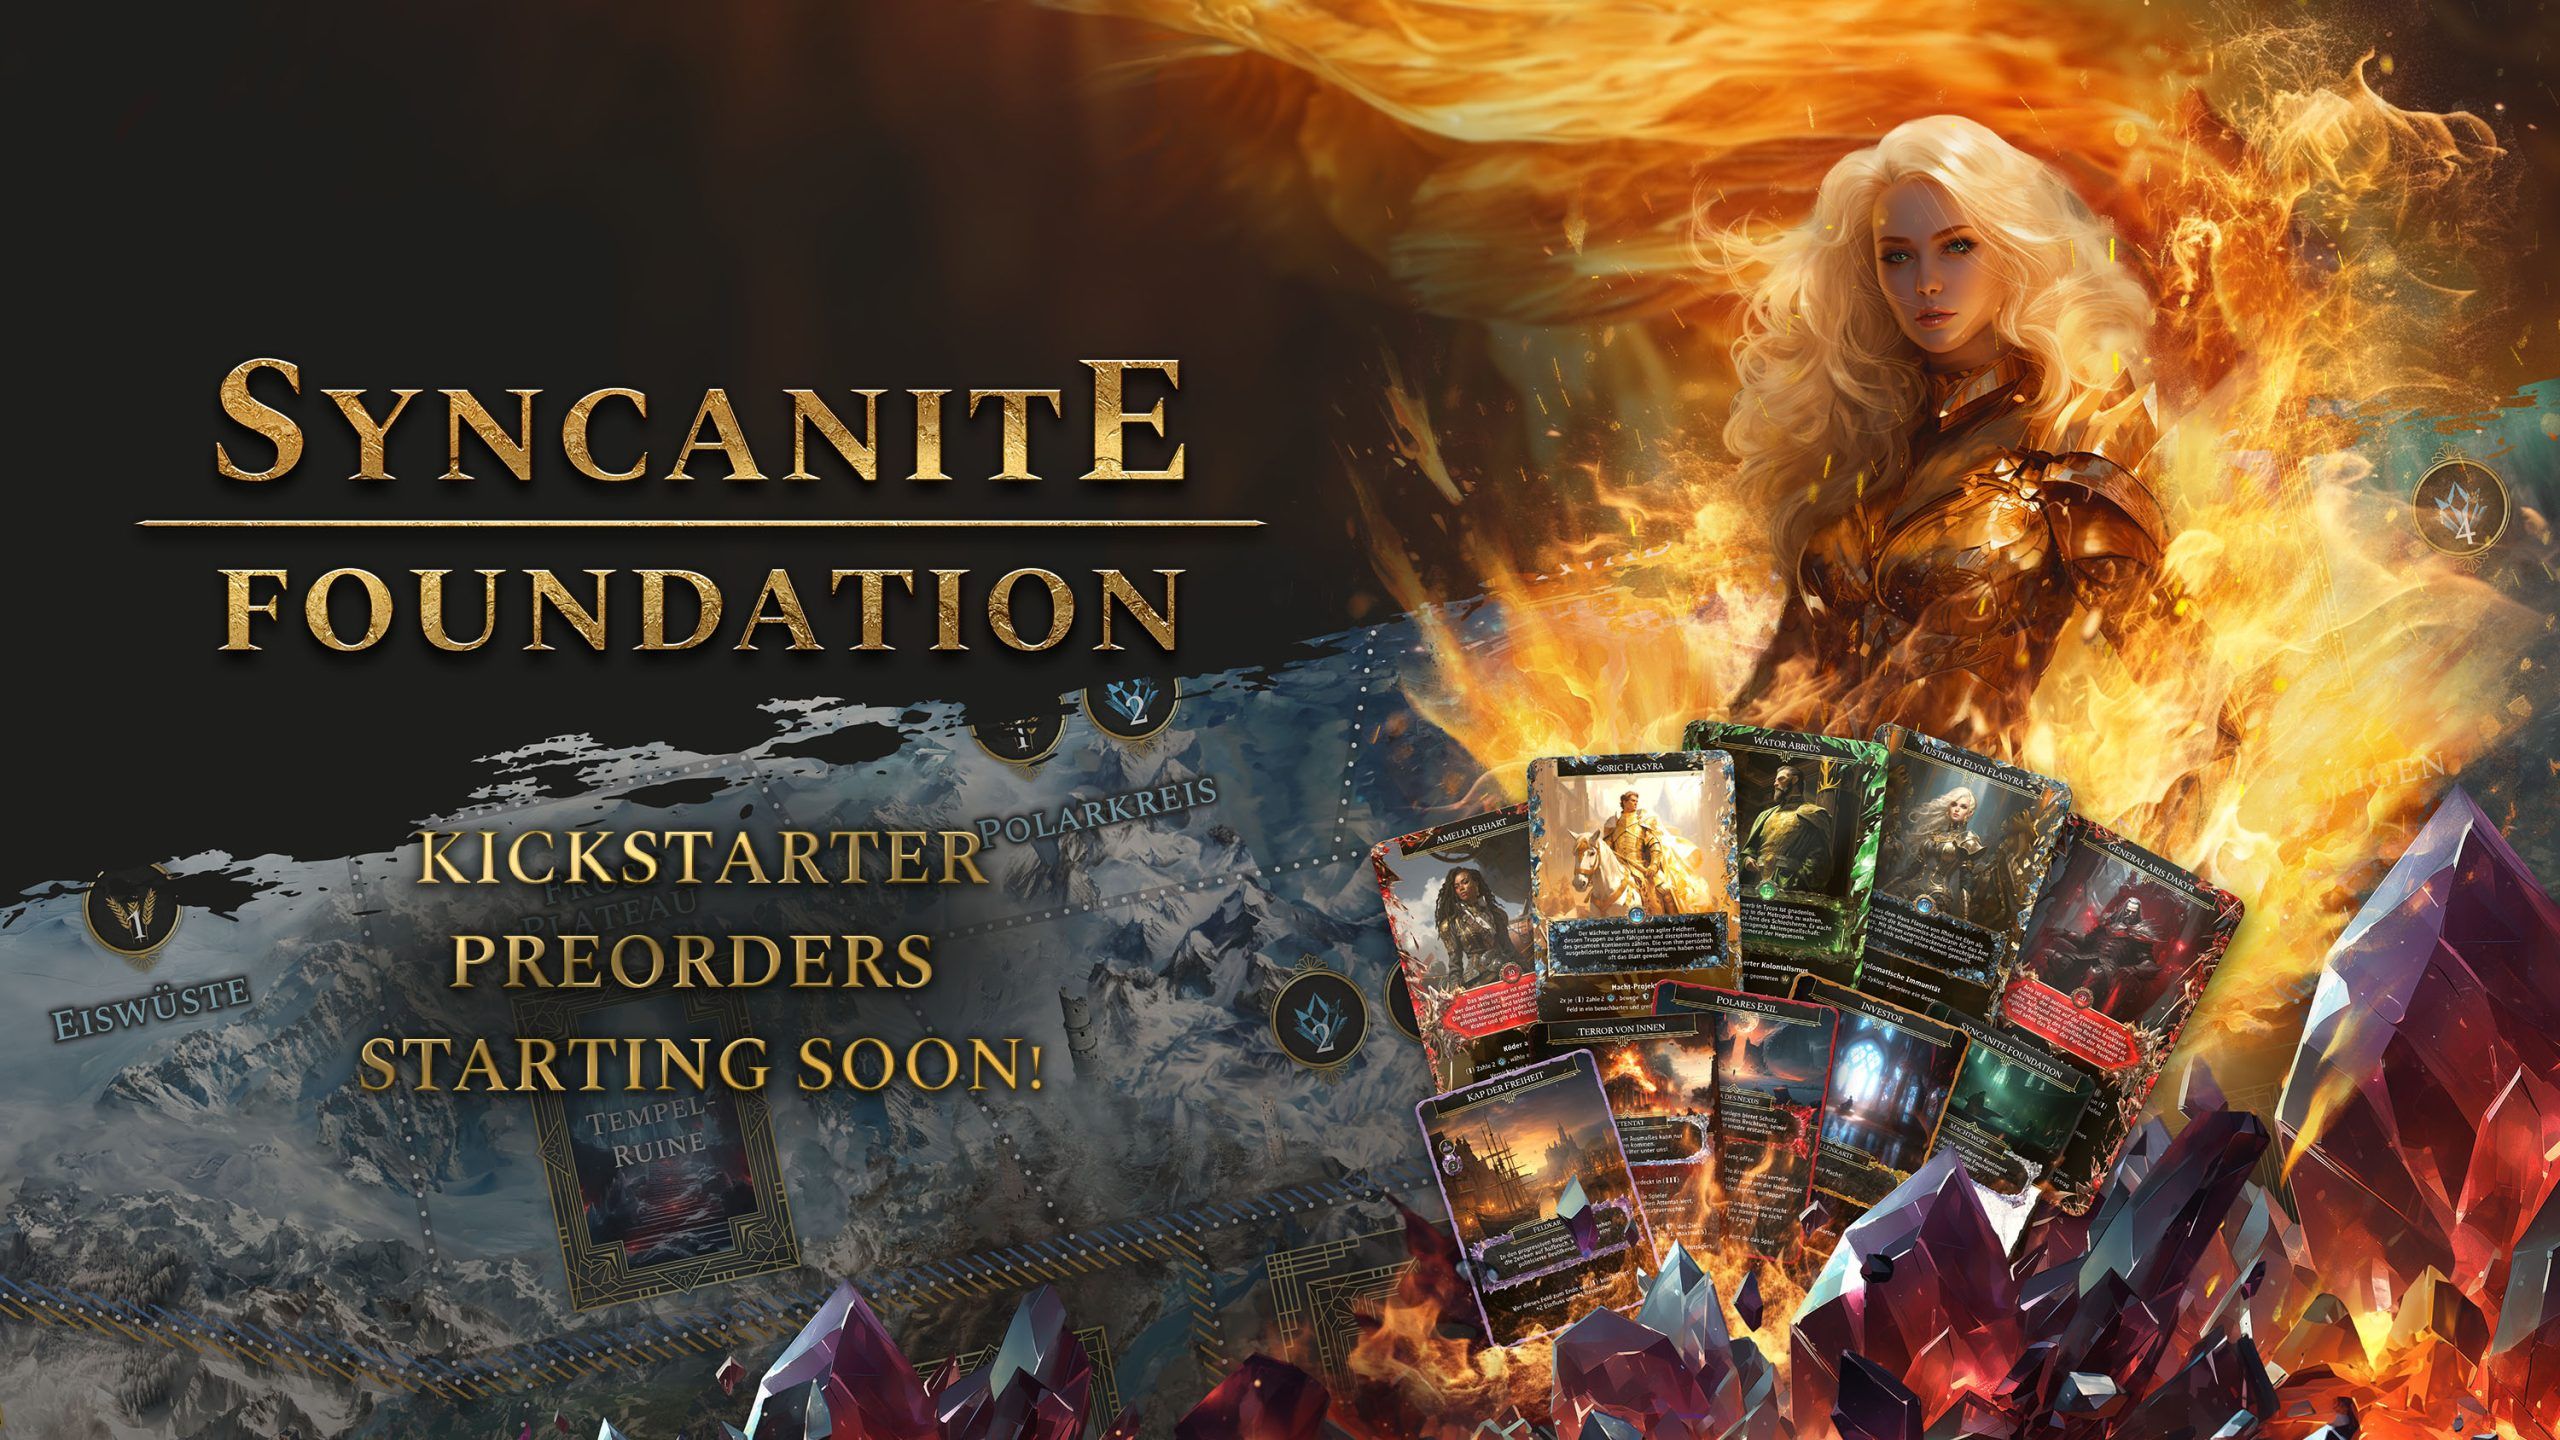 Syncanite Foundation Boardgame - Preorders starting soon